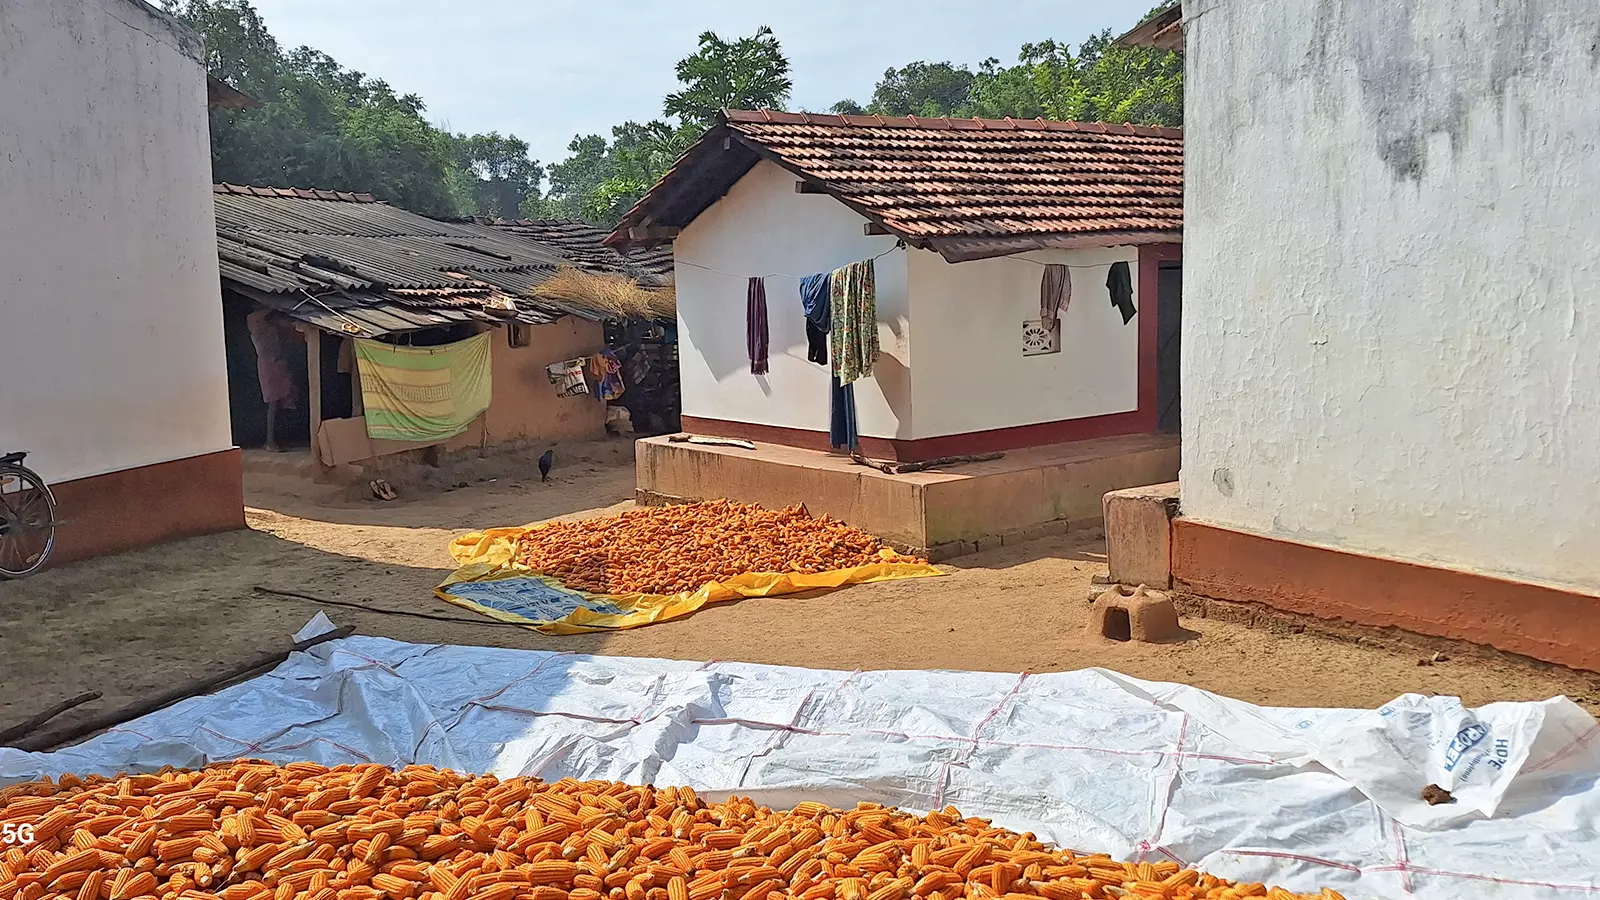 Corn is one of the main crops cultivated in Machkot. The villagers keep whatever they need for daily consumption and sell the rest at the market in Bastar. Photo: Puneet Nicholas Yadav